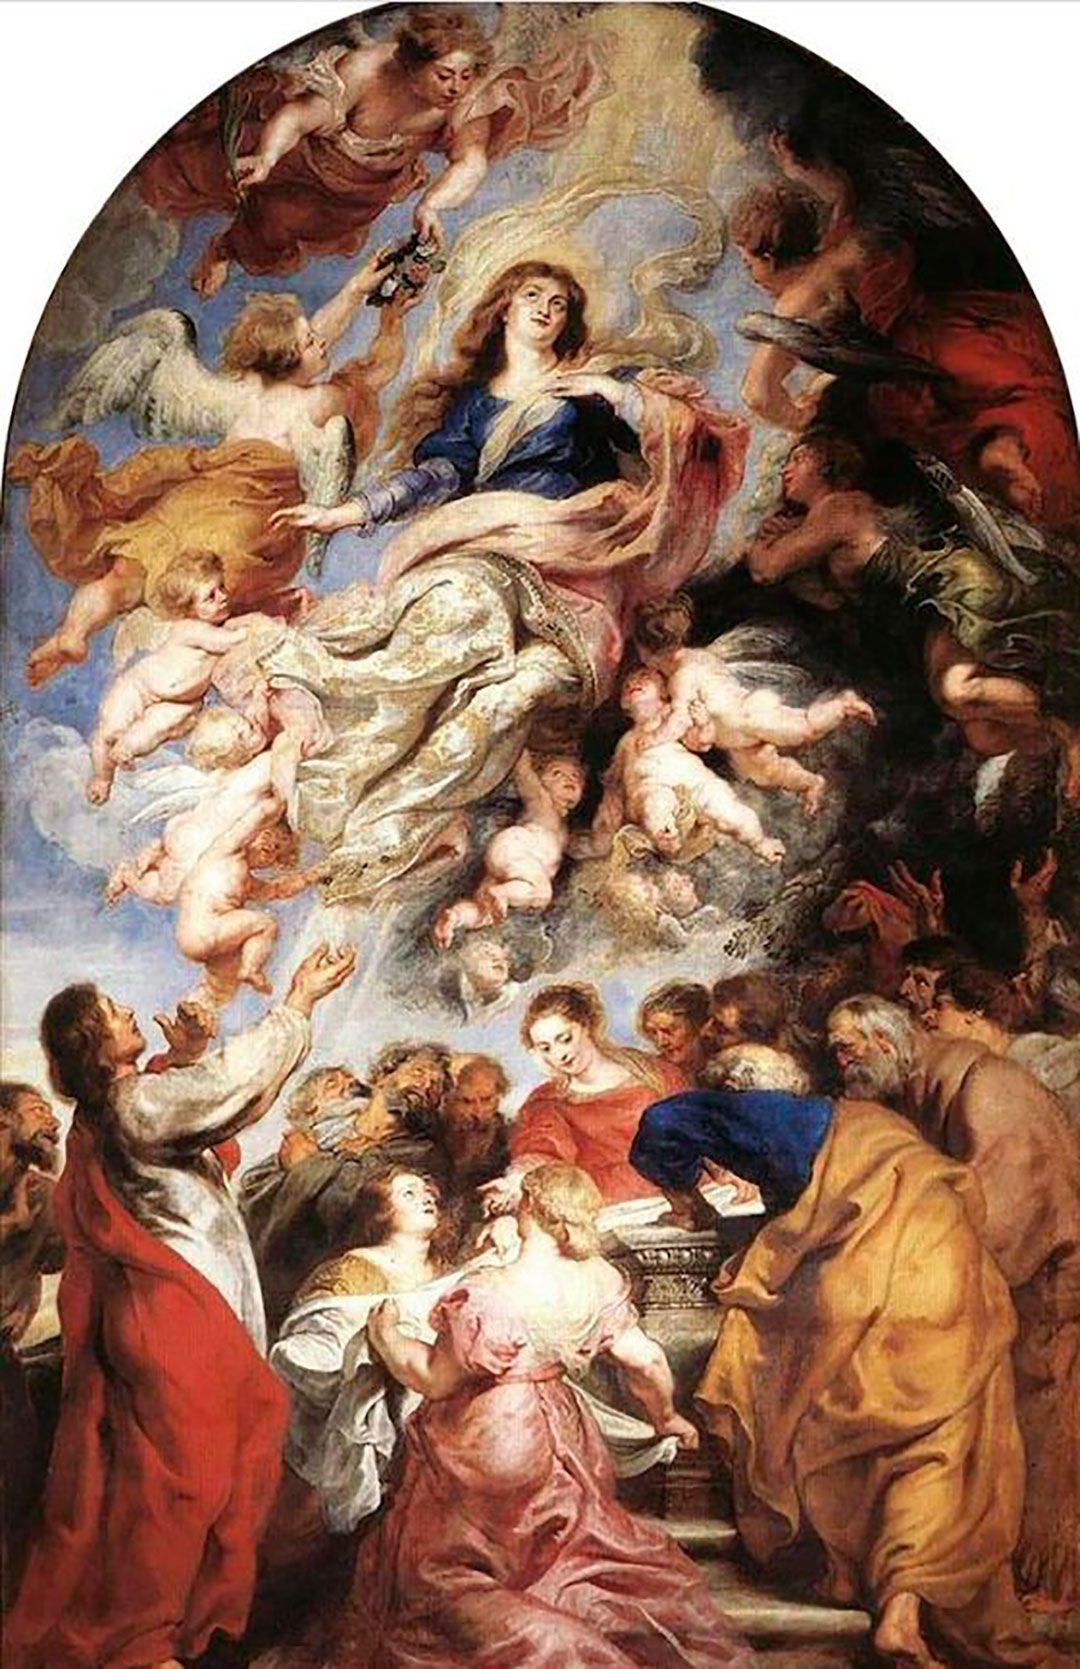 The Assumption Of The Virgin Mary In Rubens' Version